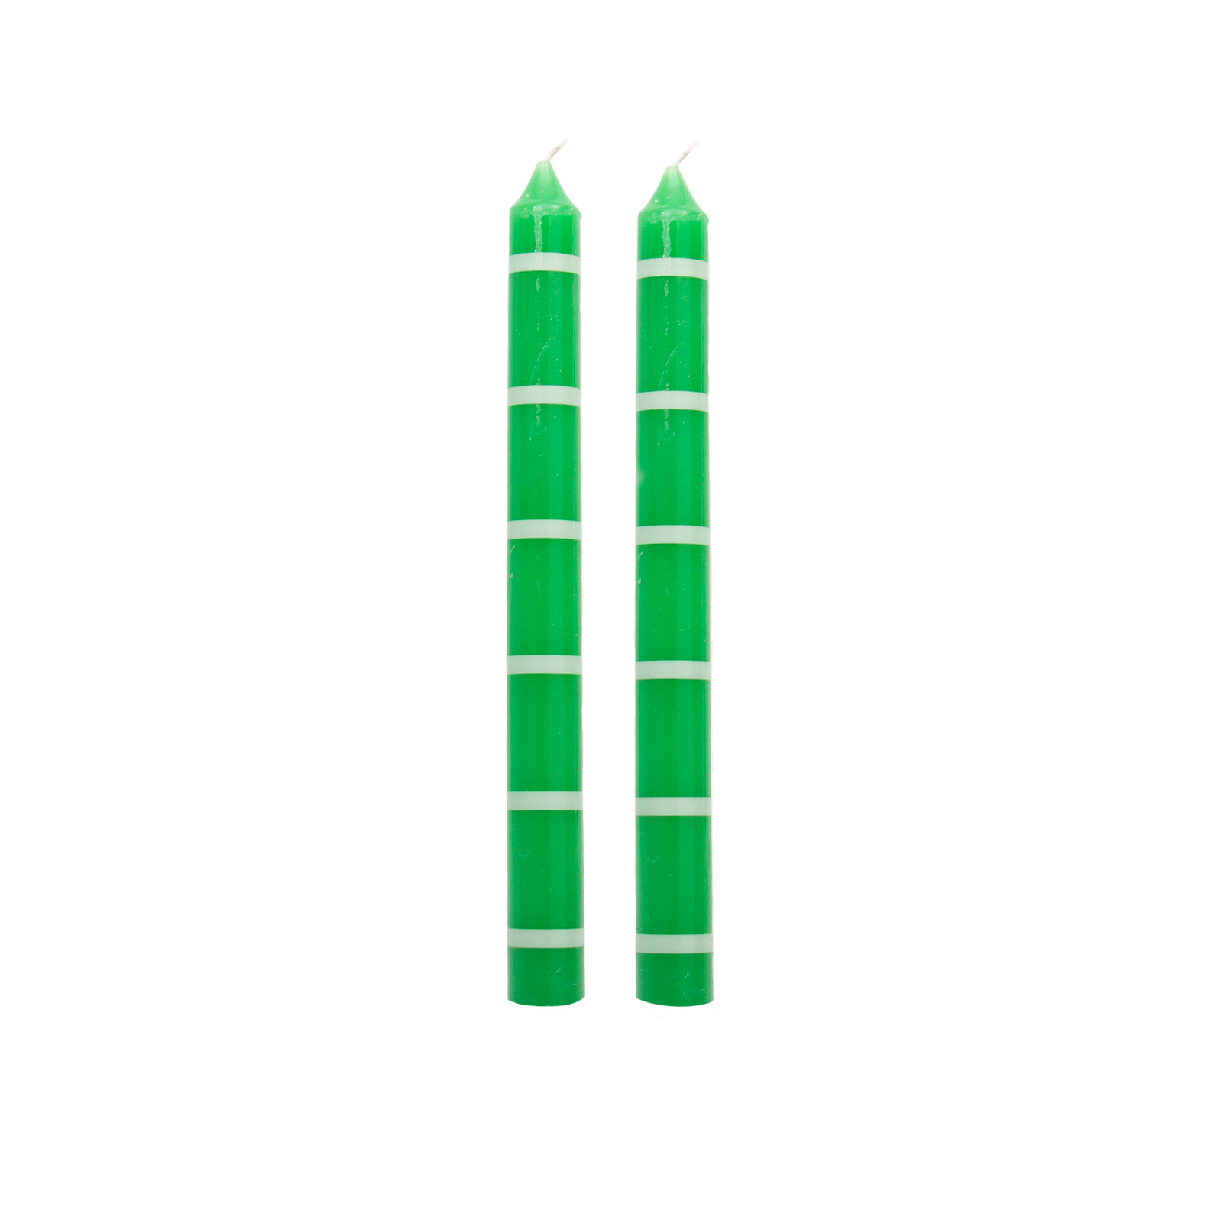 PACK OF 2 LONG EMERALD CANDLES HF